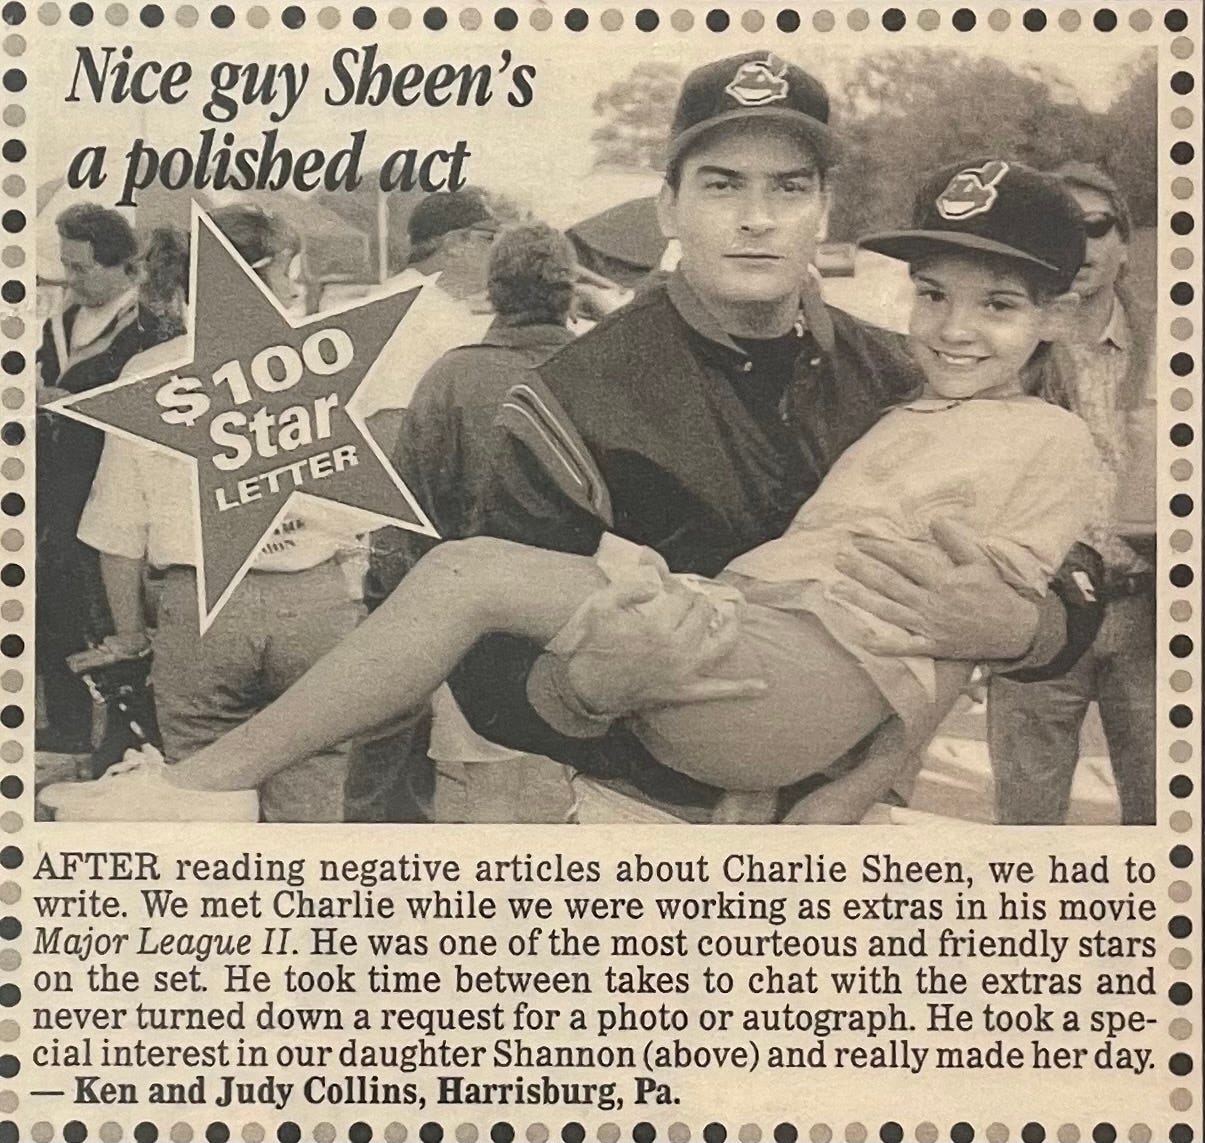 A photo of Charlie Sheen holding me while working on the set of Major League II.